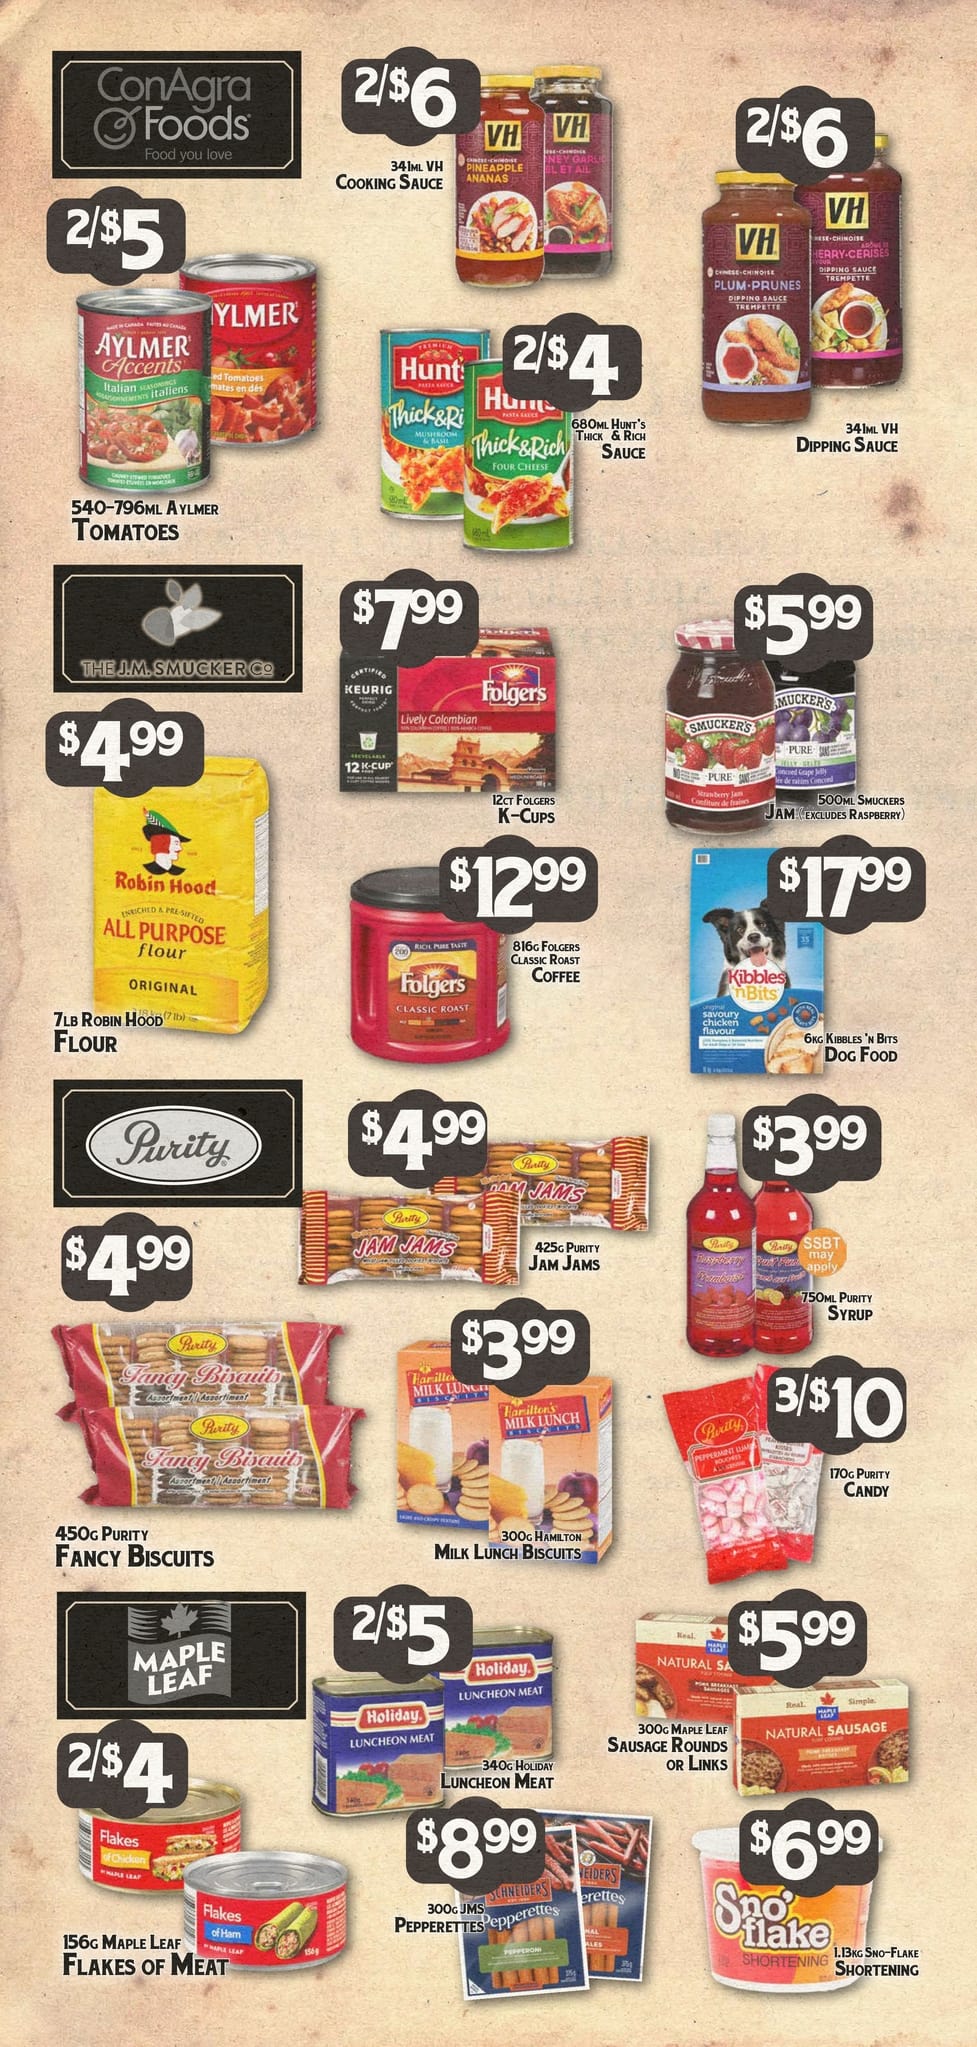 Powell's Supermarket - Weekly Flyer Specials - Page 10